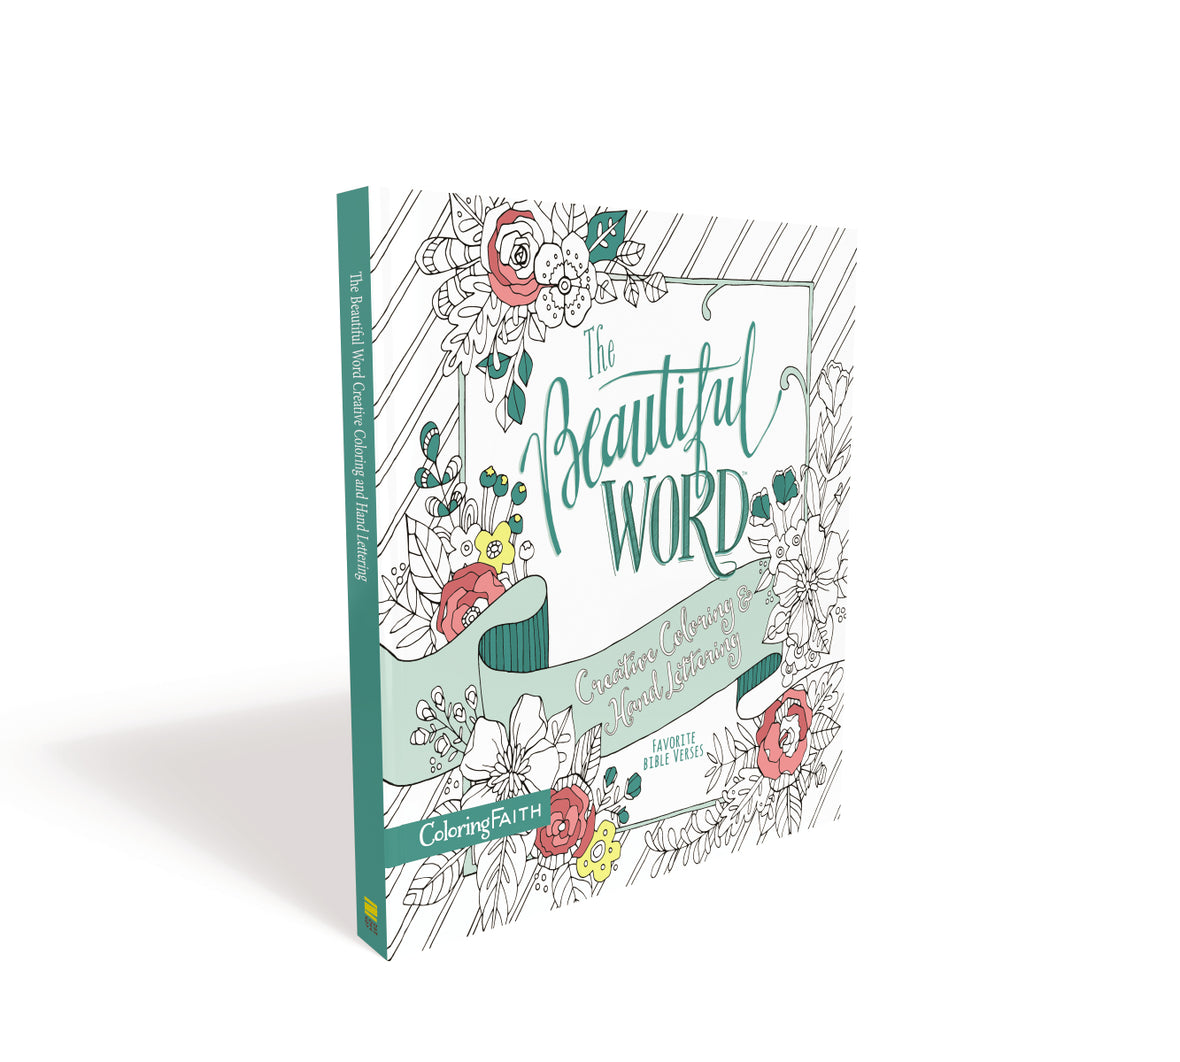 The Beautiful Word Adult Coloring Book: Creative Coloring and Hand Lettering